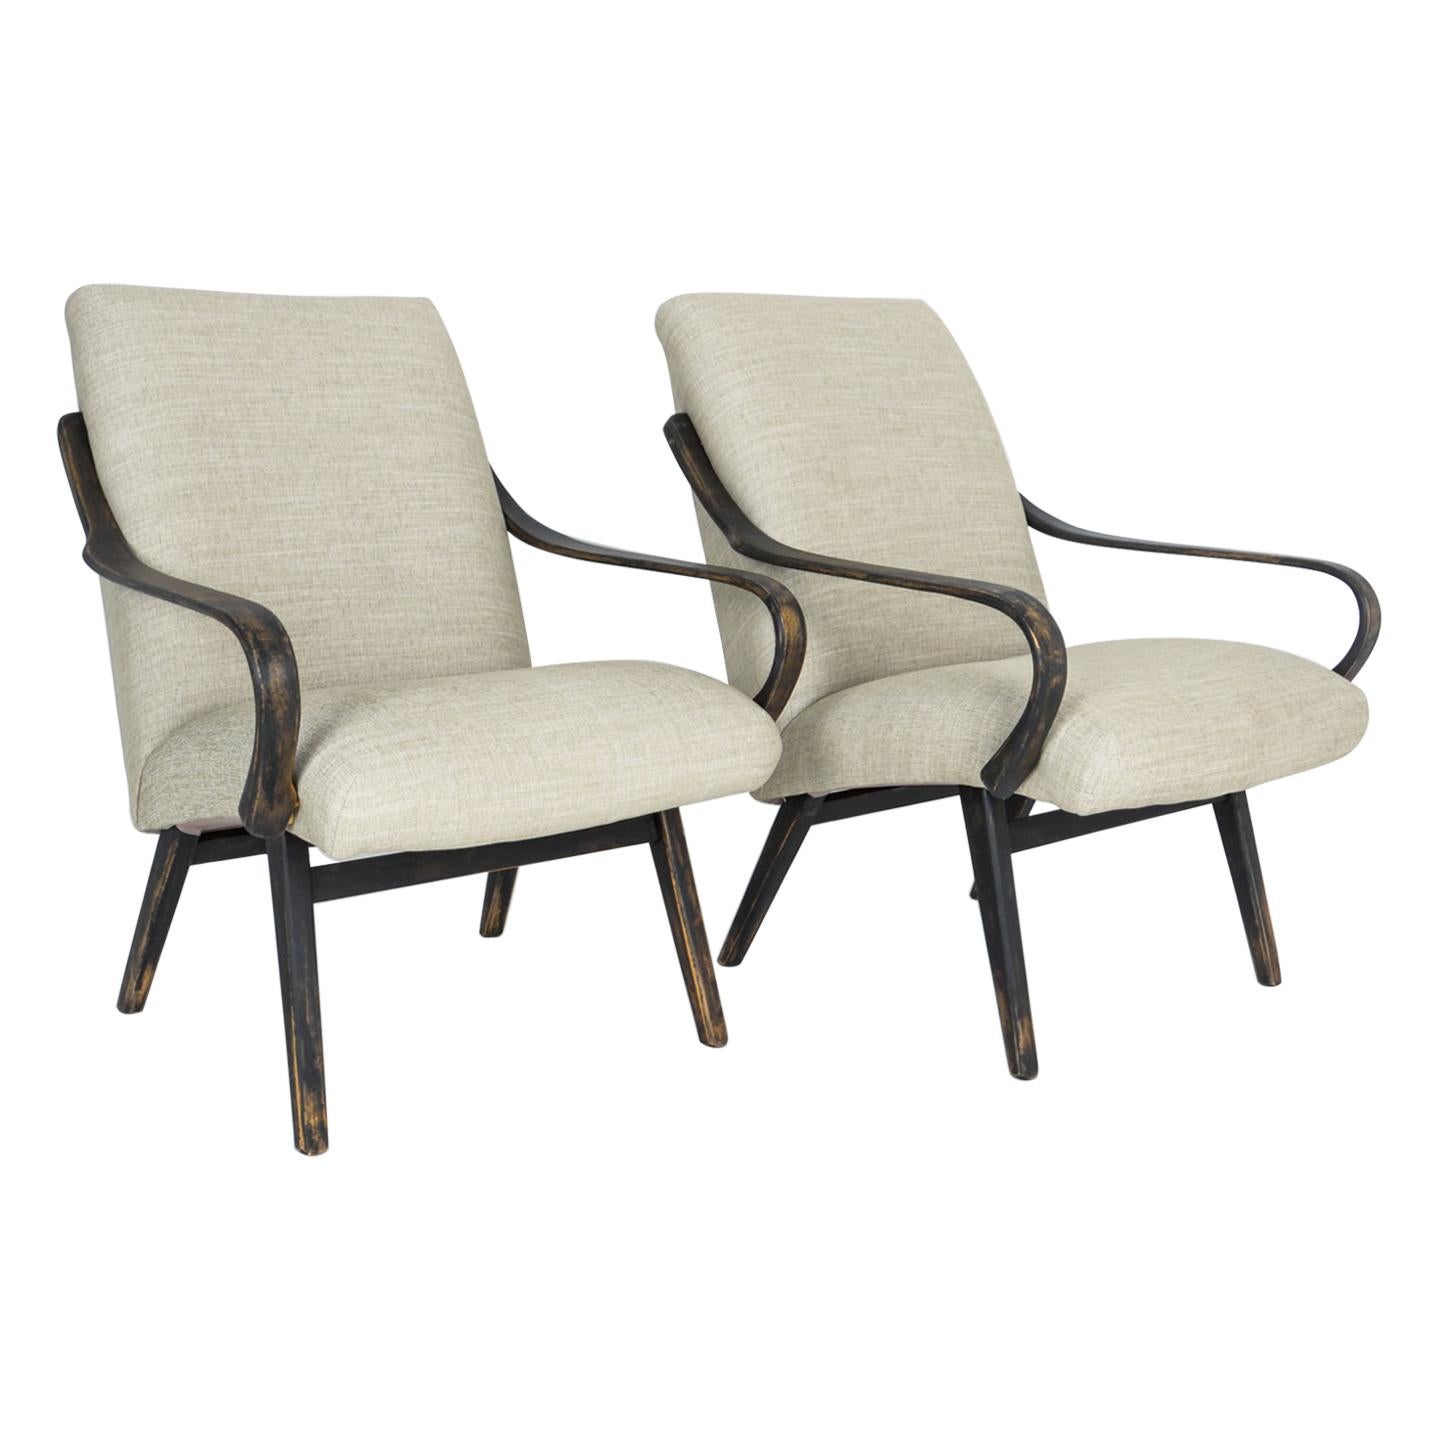 1960s Midcentury Czech Lounge Chairs, a Pair